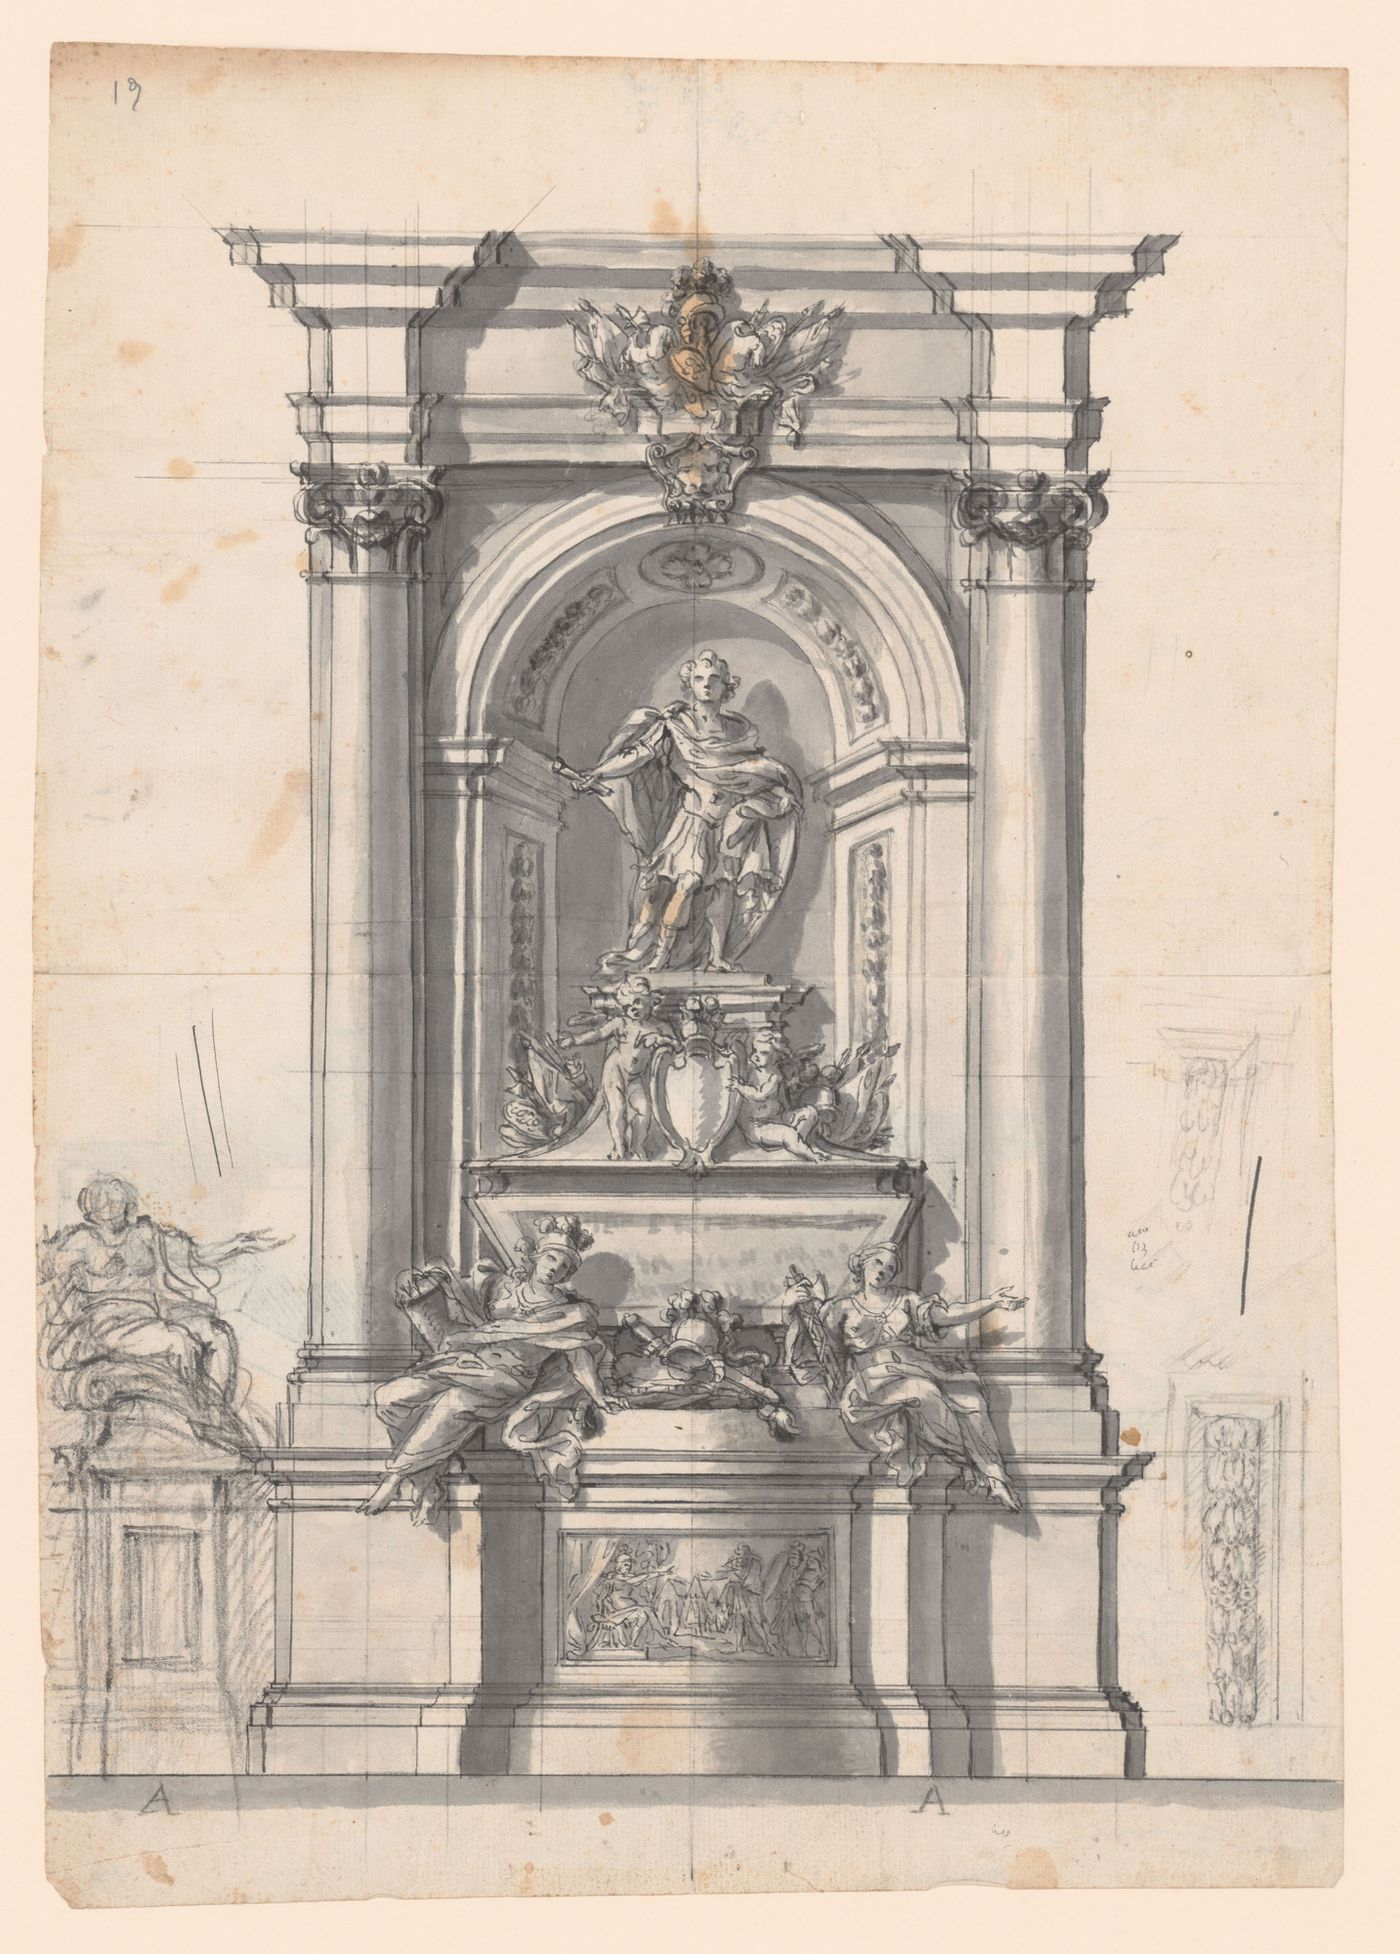 Elevation for a monument for a secular ruler; verso: Plan for a monument for a secular ruler and sketch for a canopy